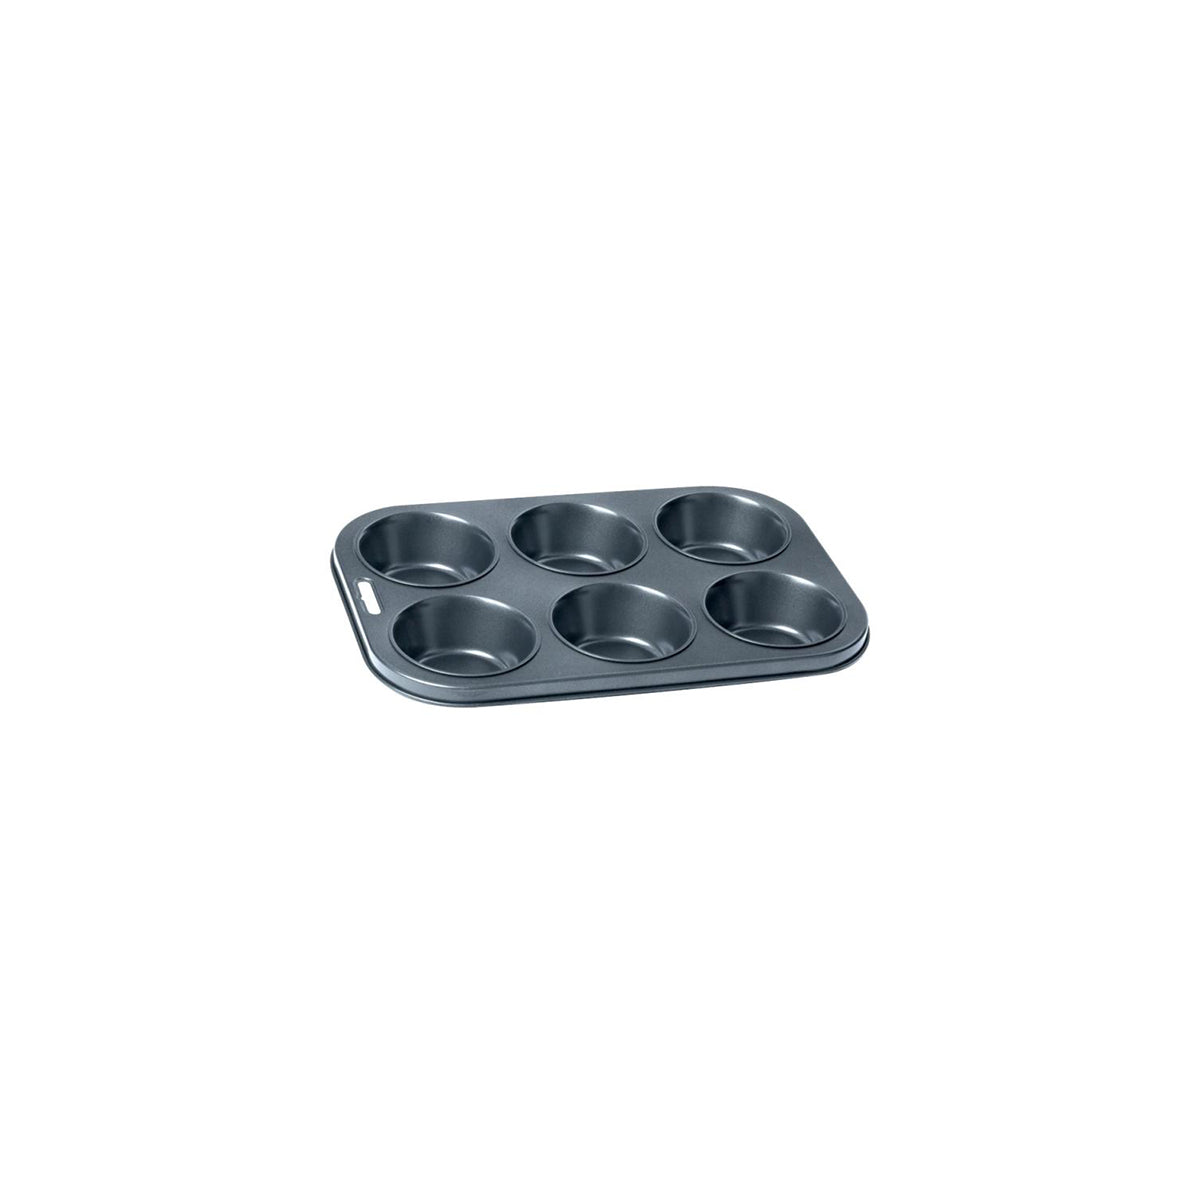 WLT9002MP Wiltshire Easybake Muffin Pan 6 Cup Tomkin Australia Hospitality Supplies